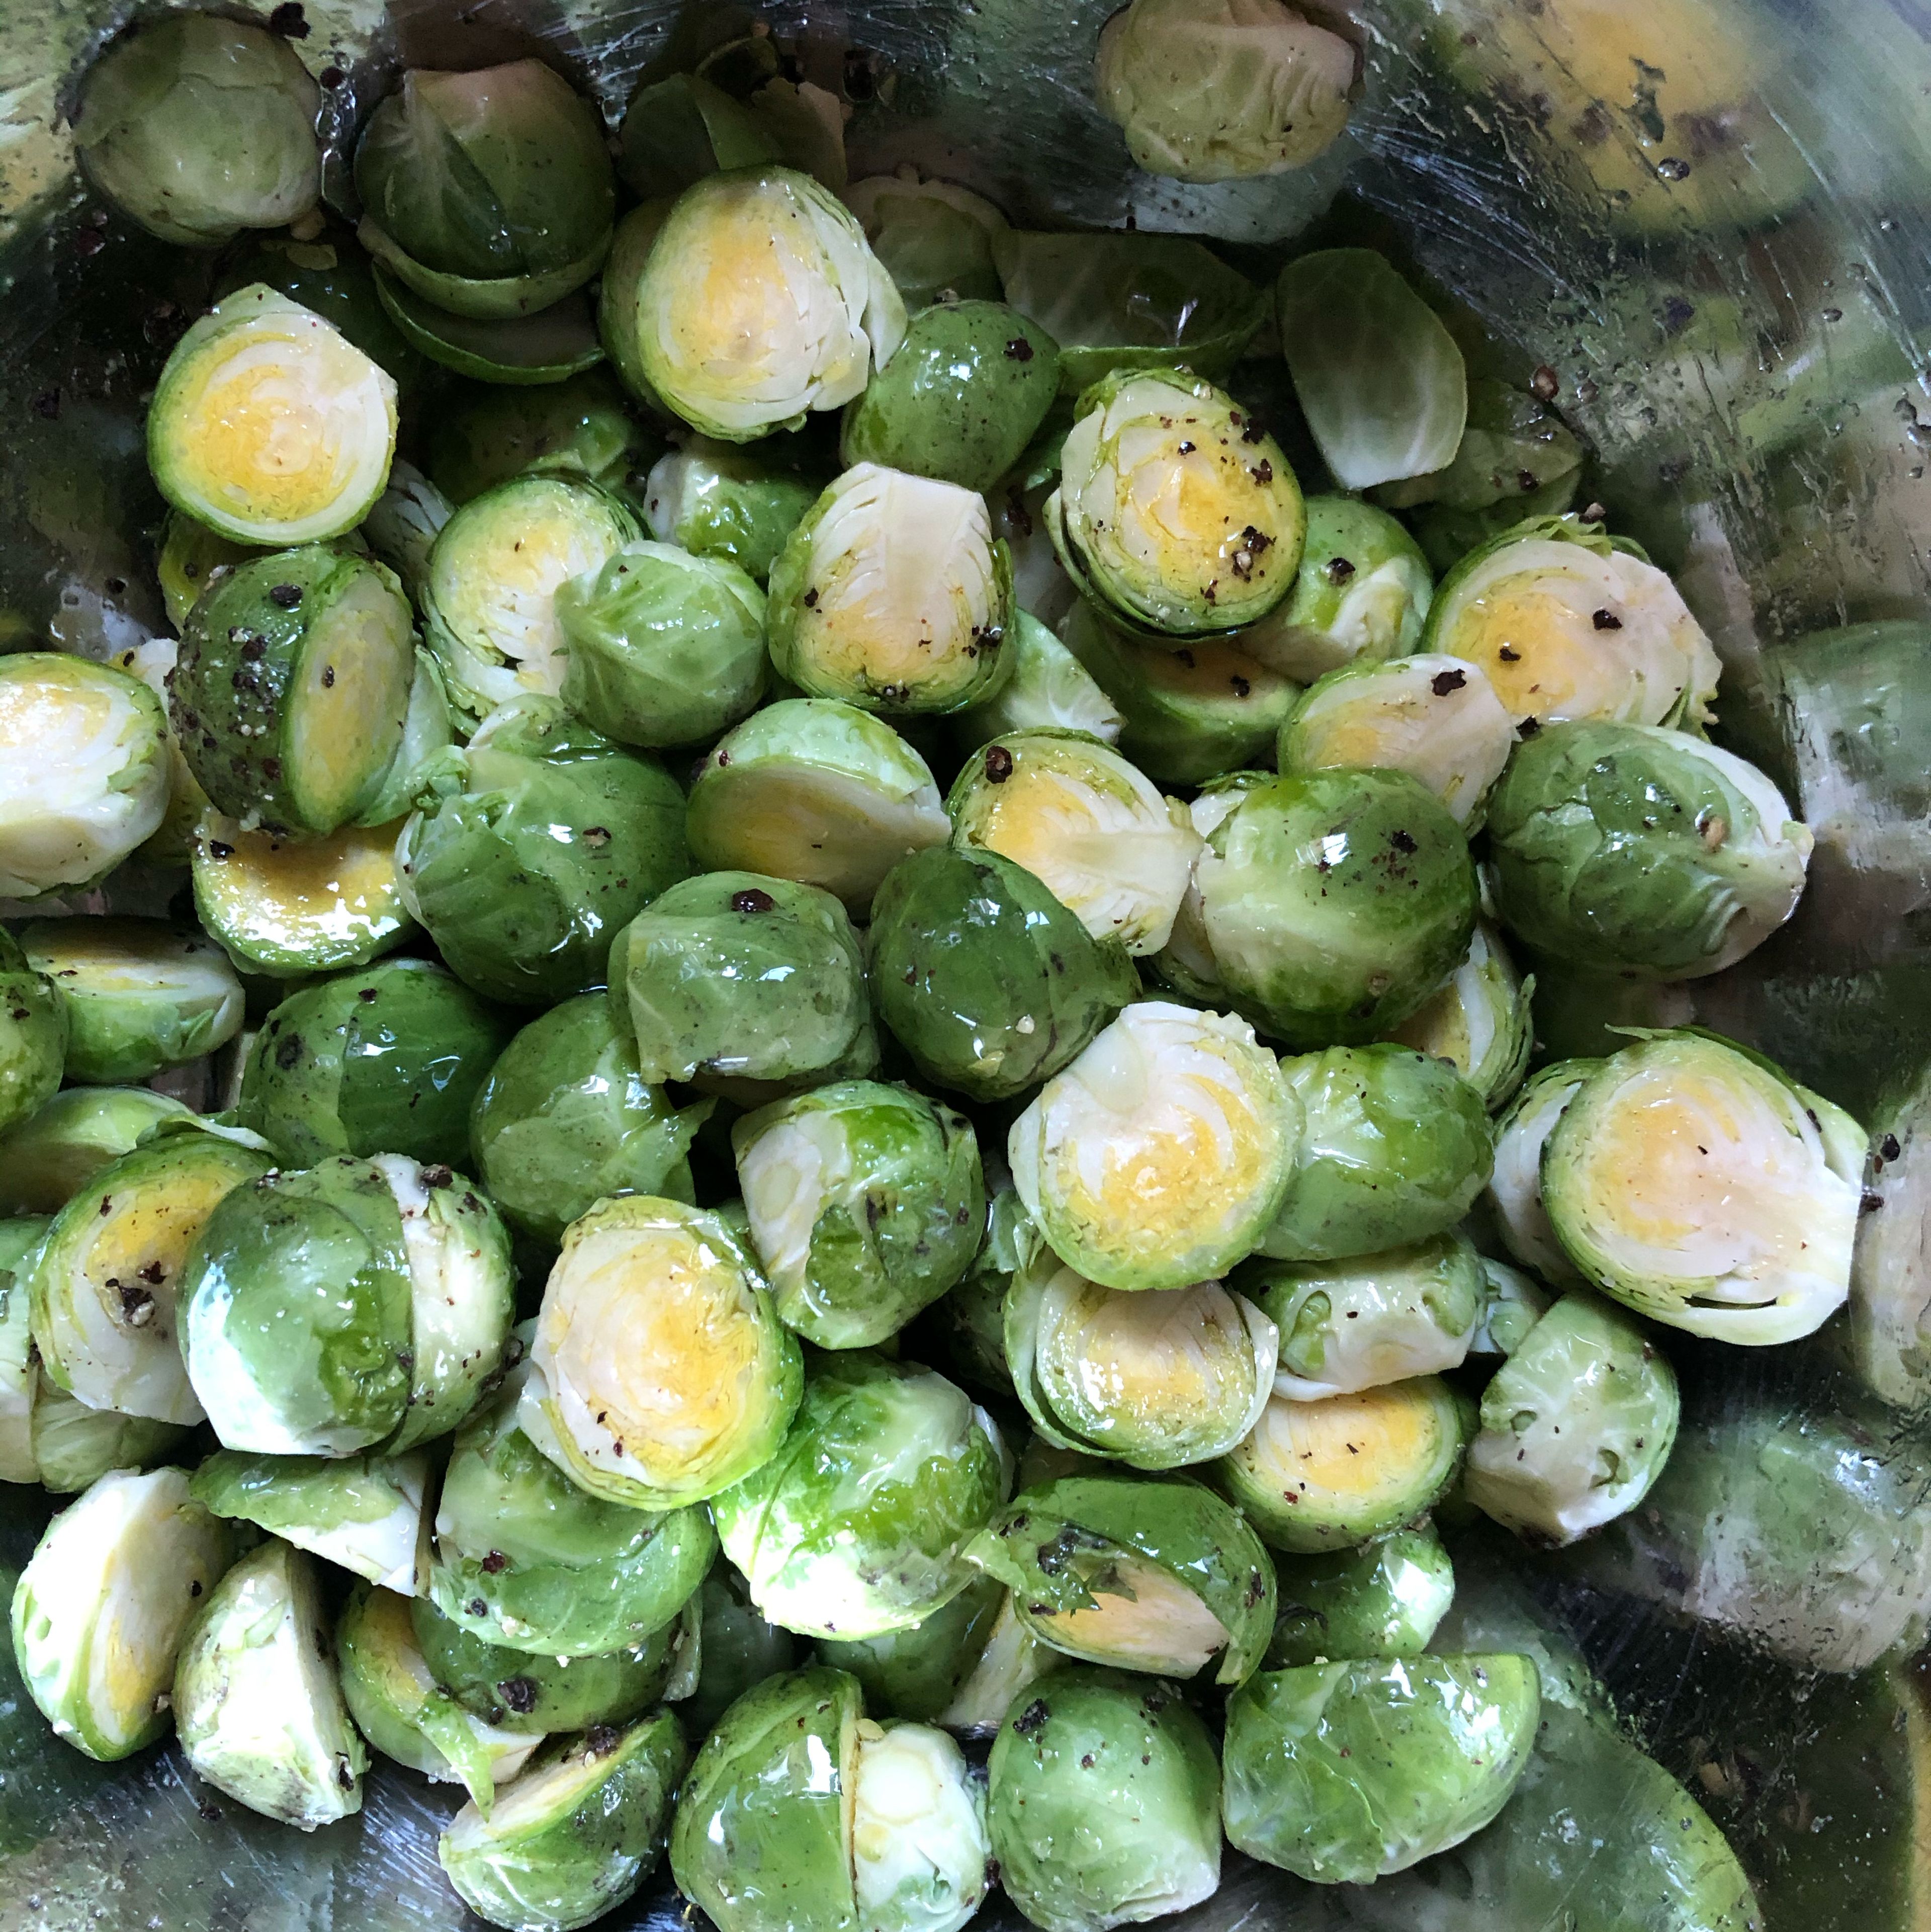 Cut sprouts in half, drizzle oil, salt, pepper and agave sirup /honey and mix up